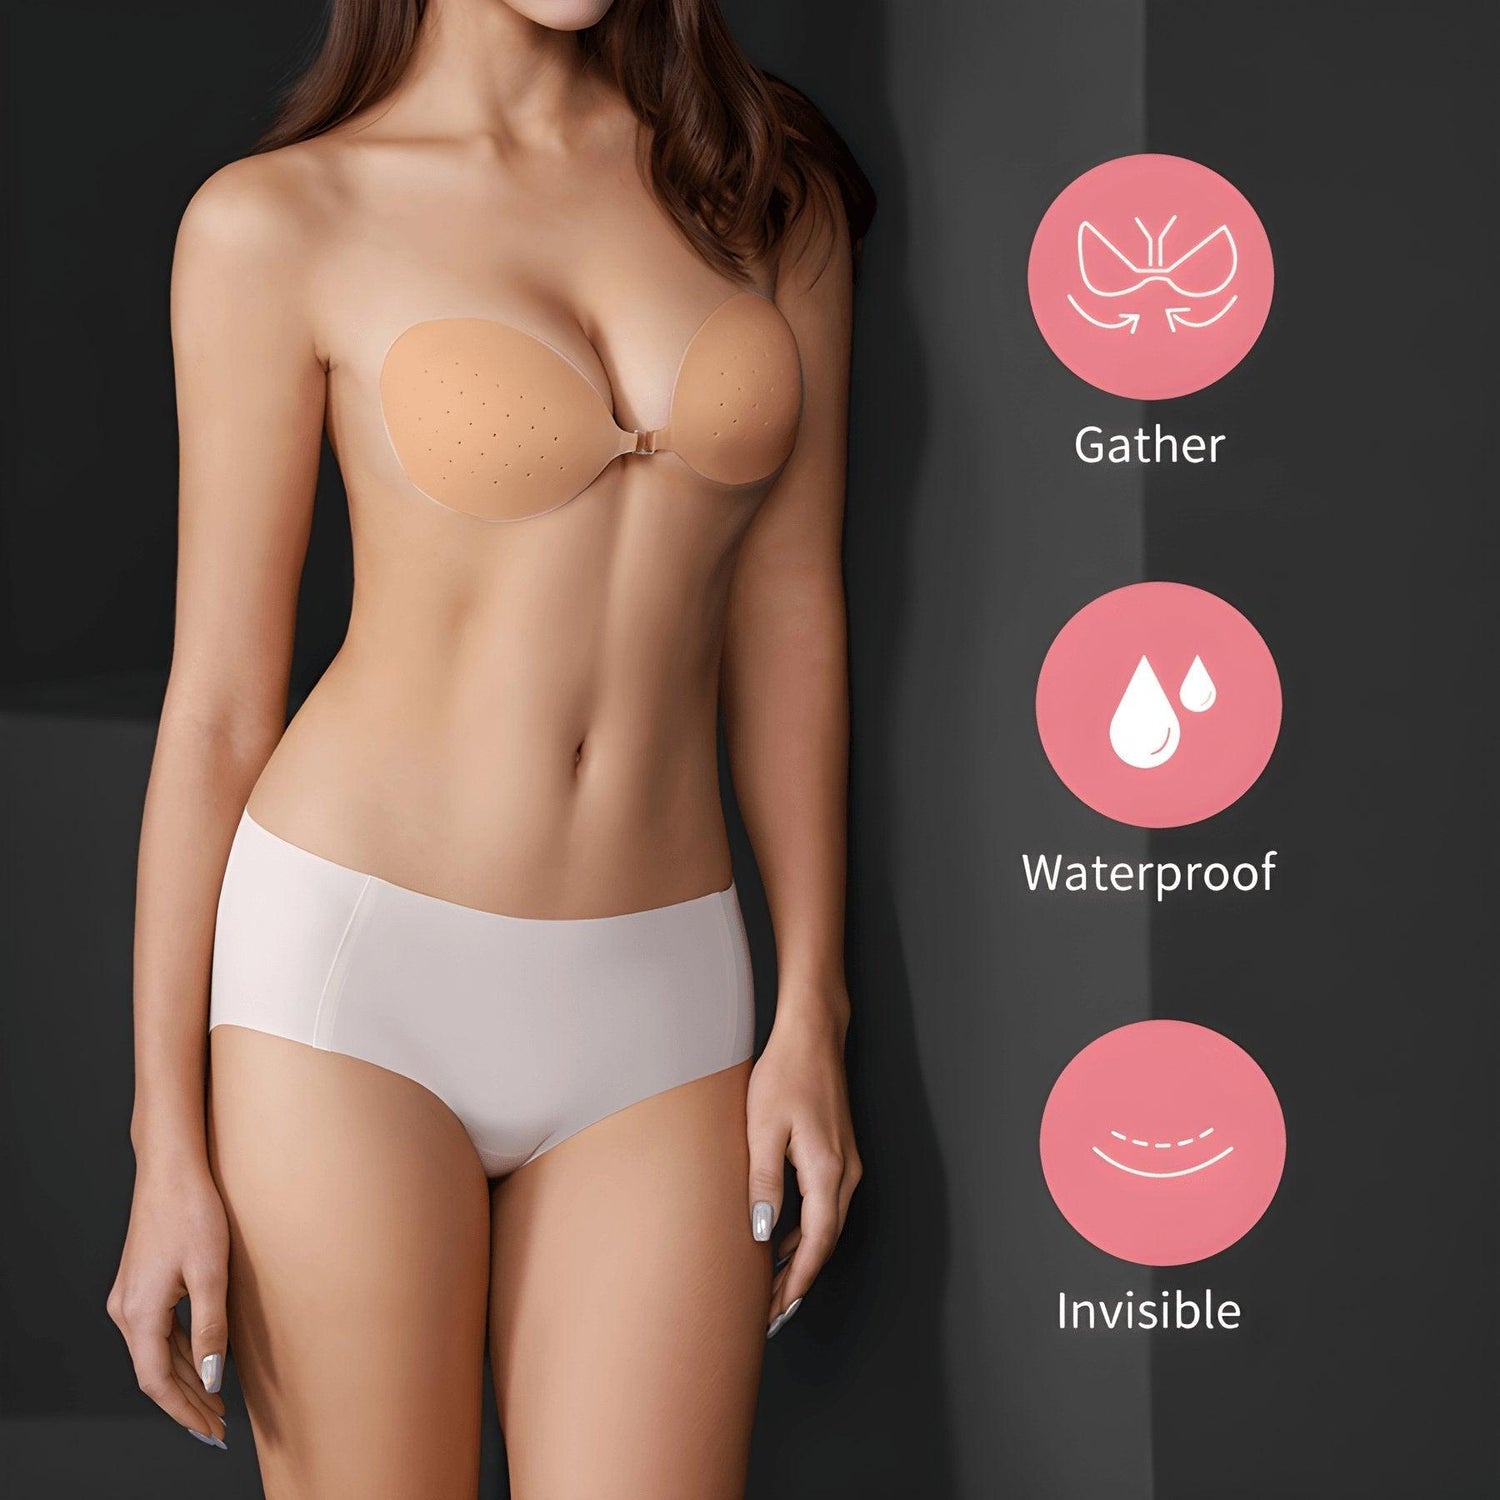 Gather Push Up Breathable Invisible Silicone Bra, High Quality